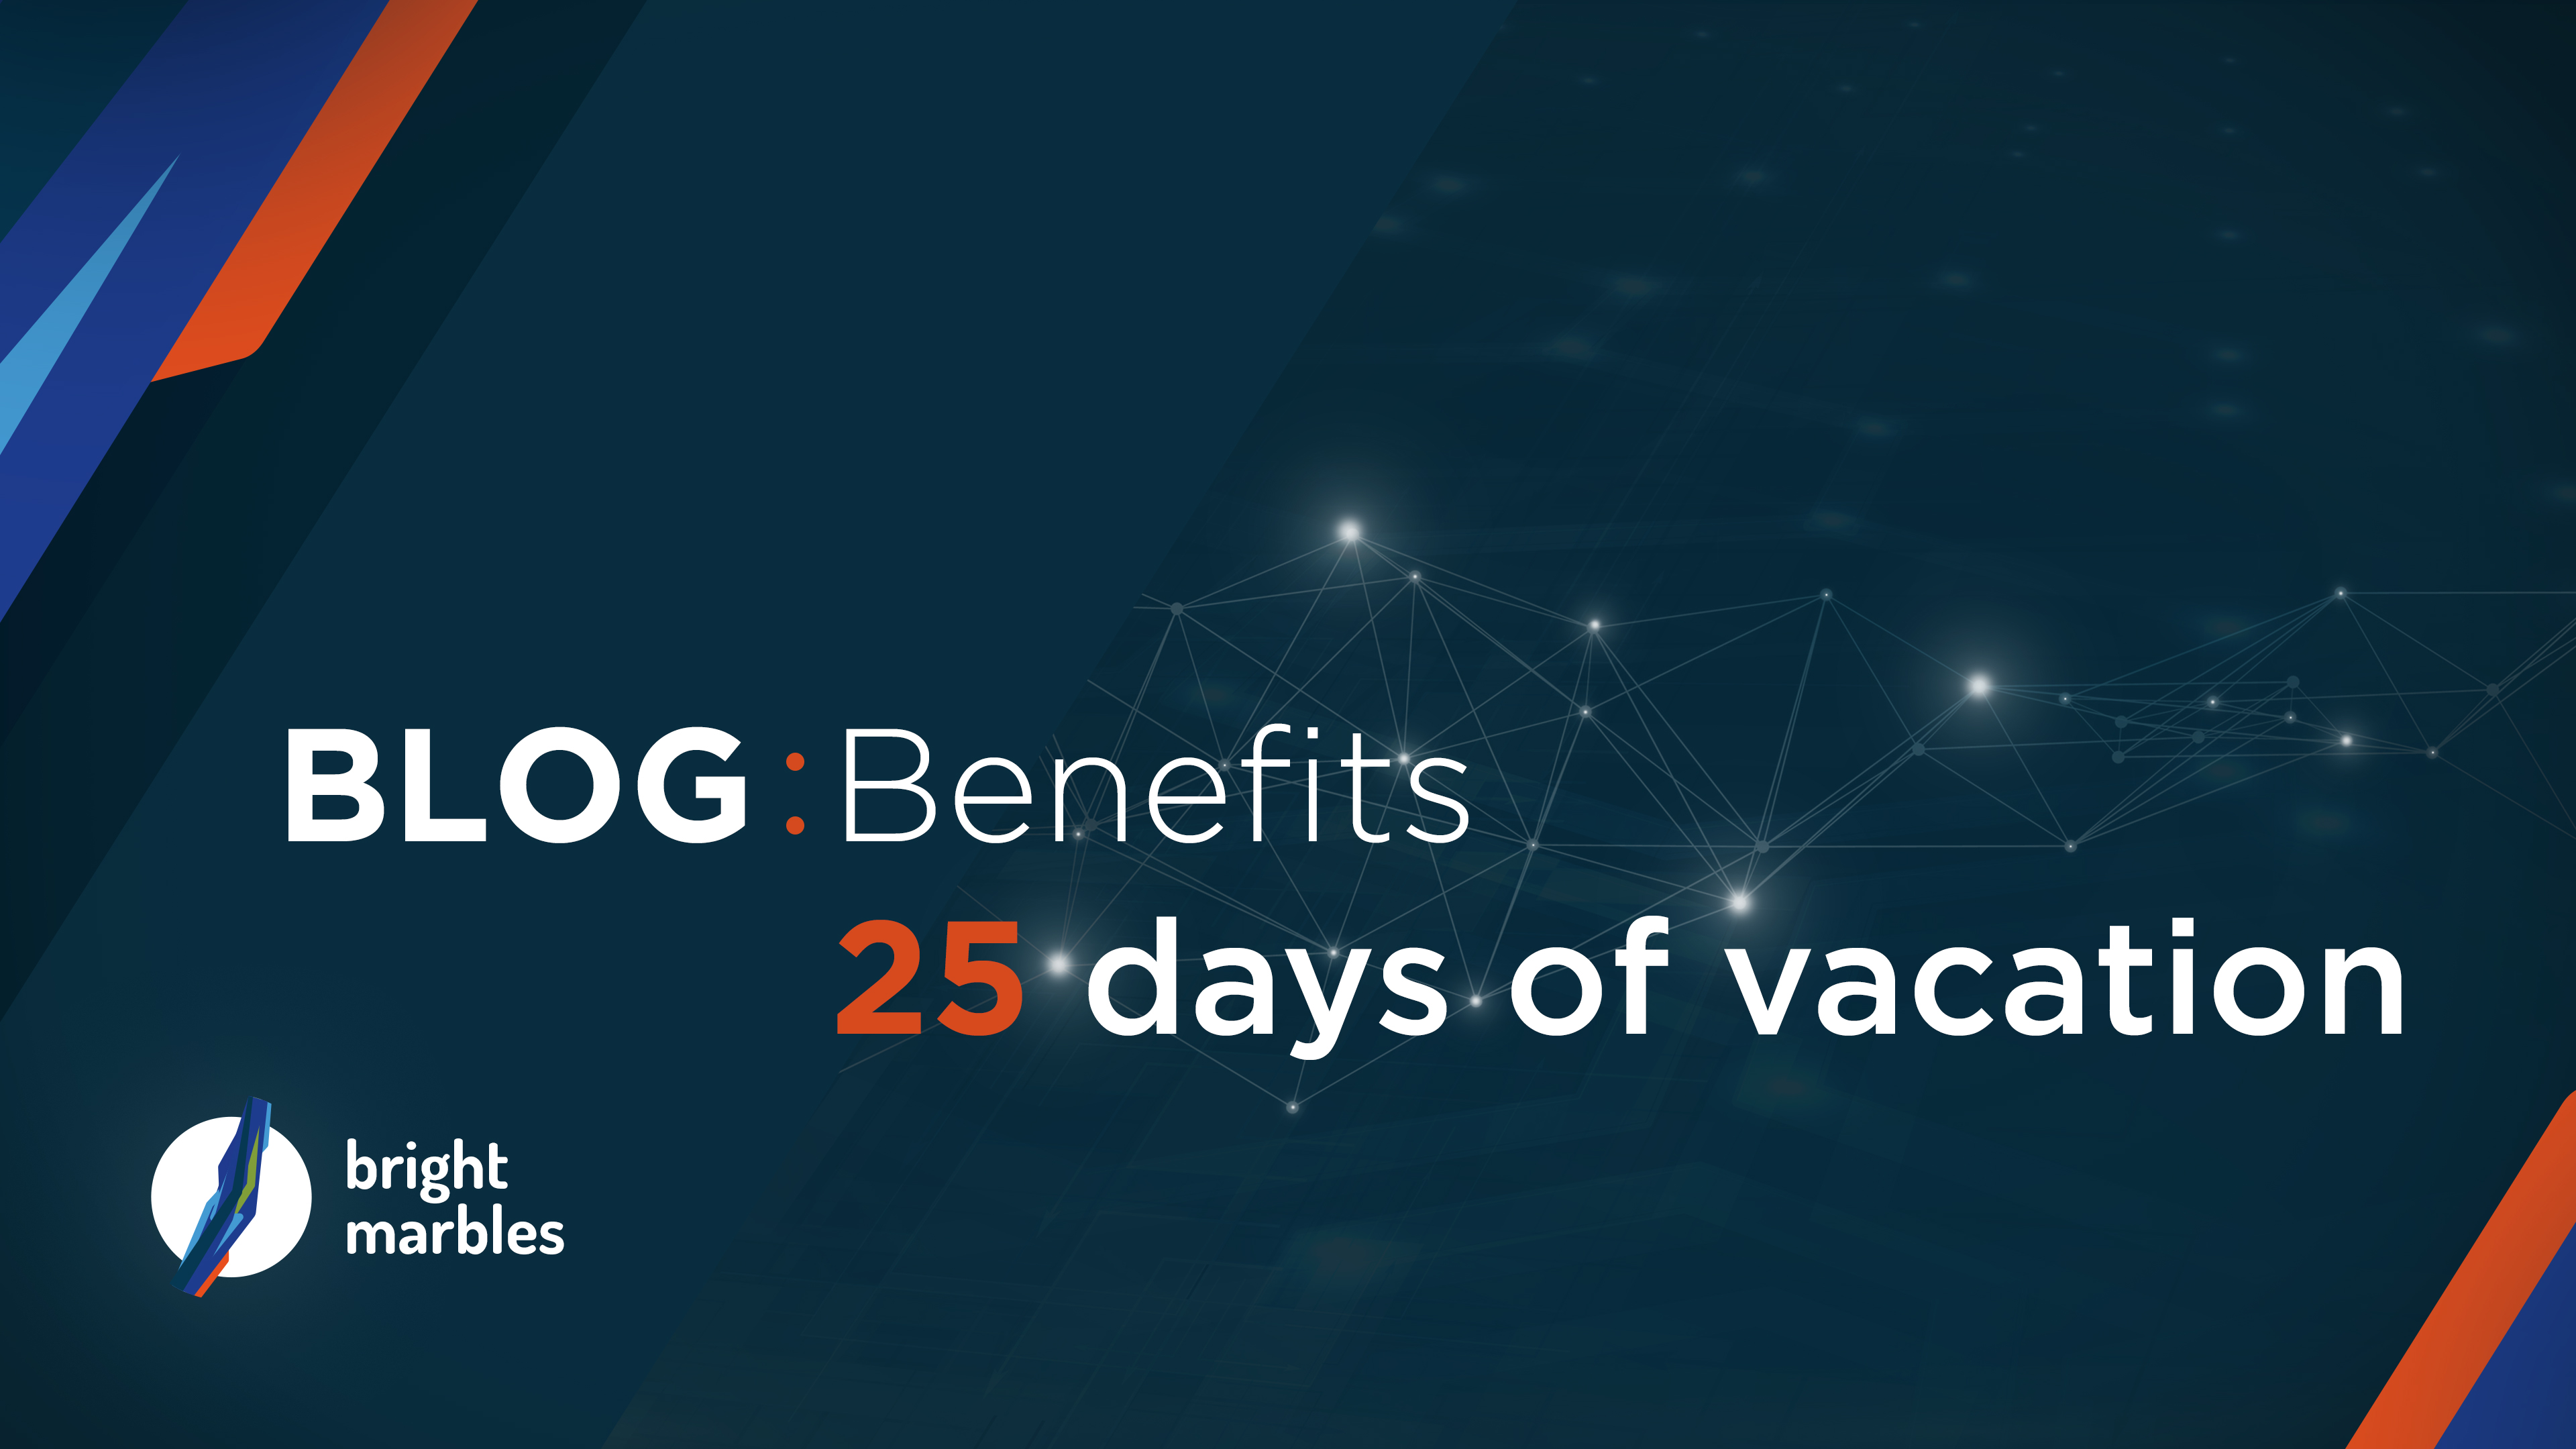 Benefits 25 days of vacation